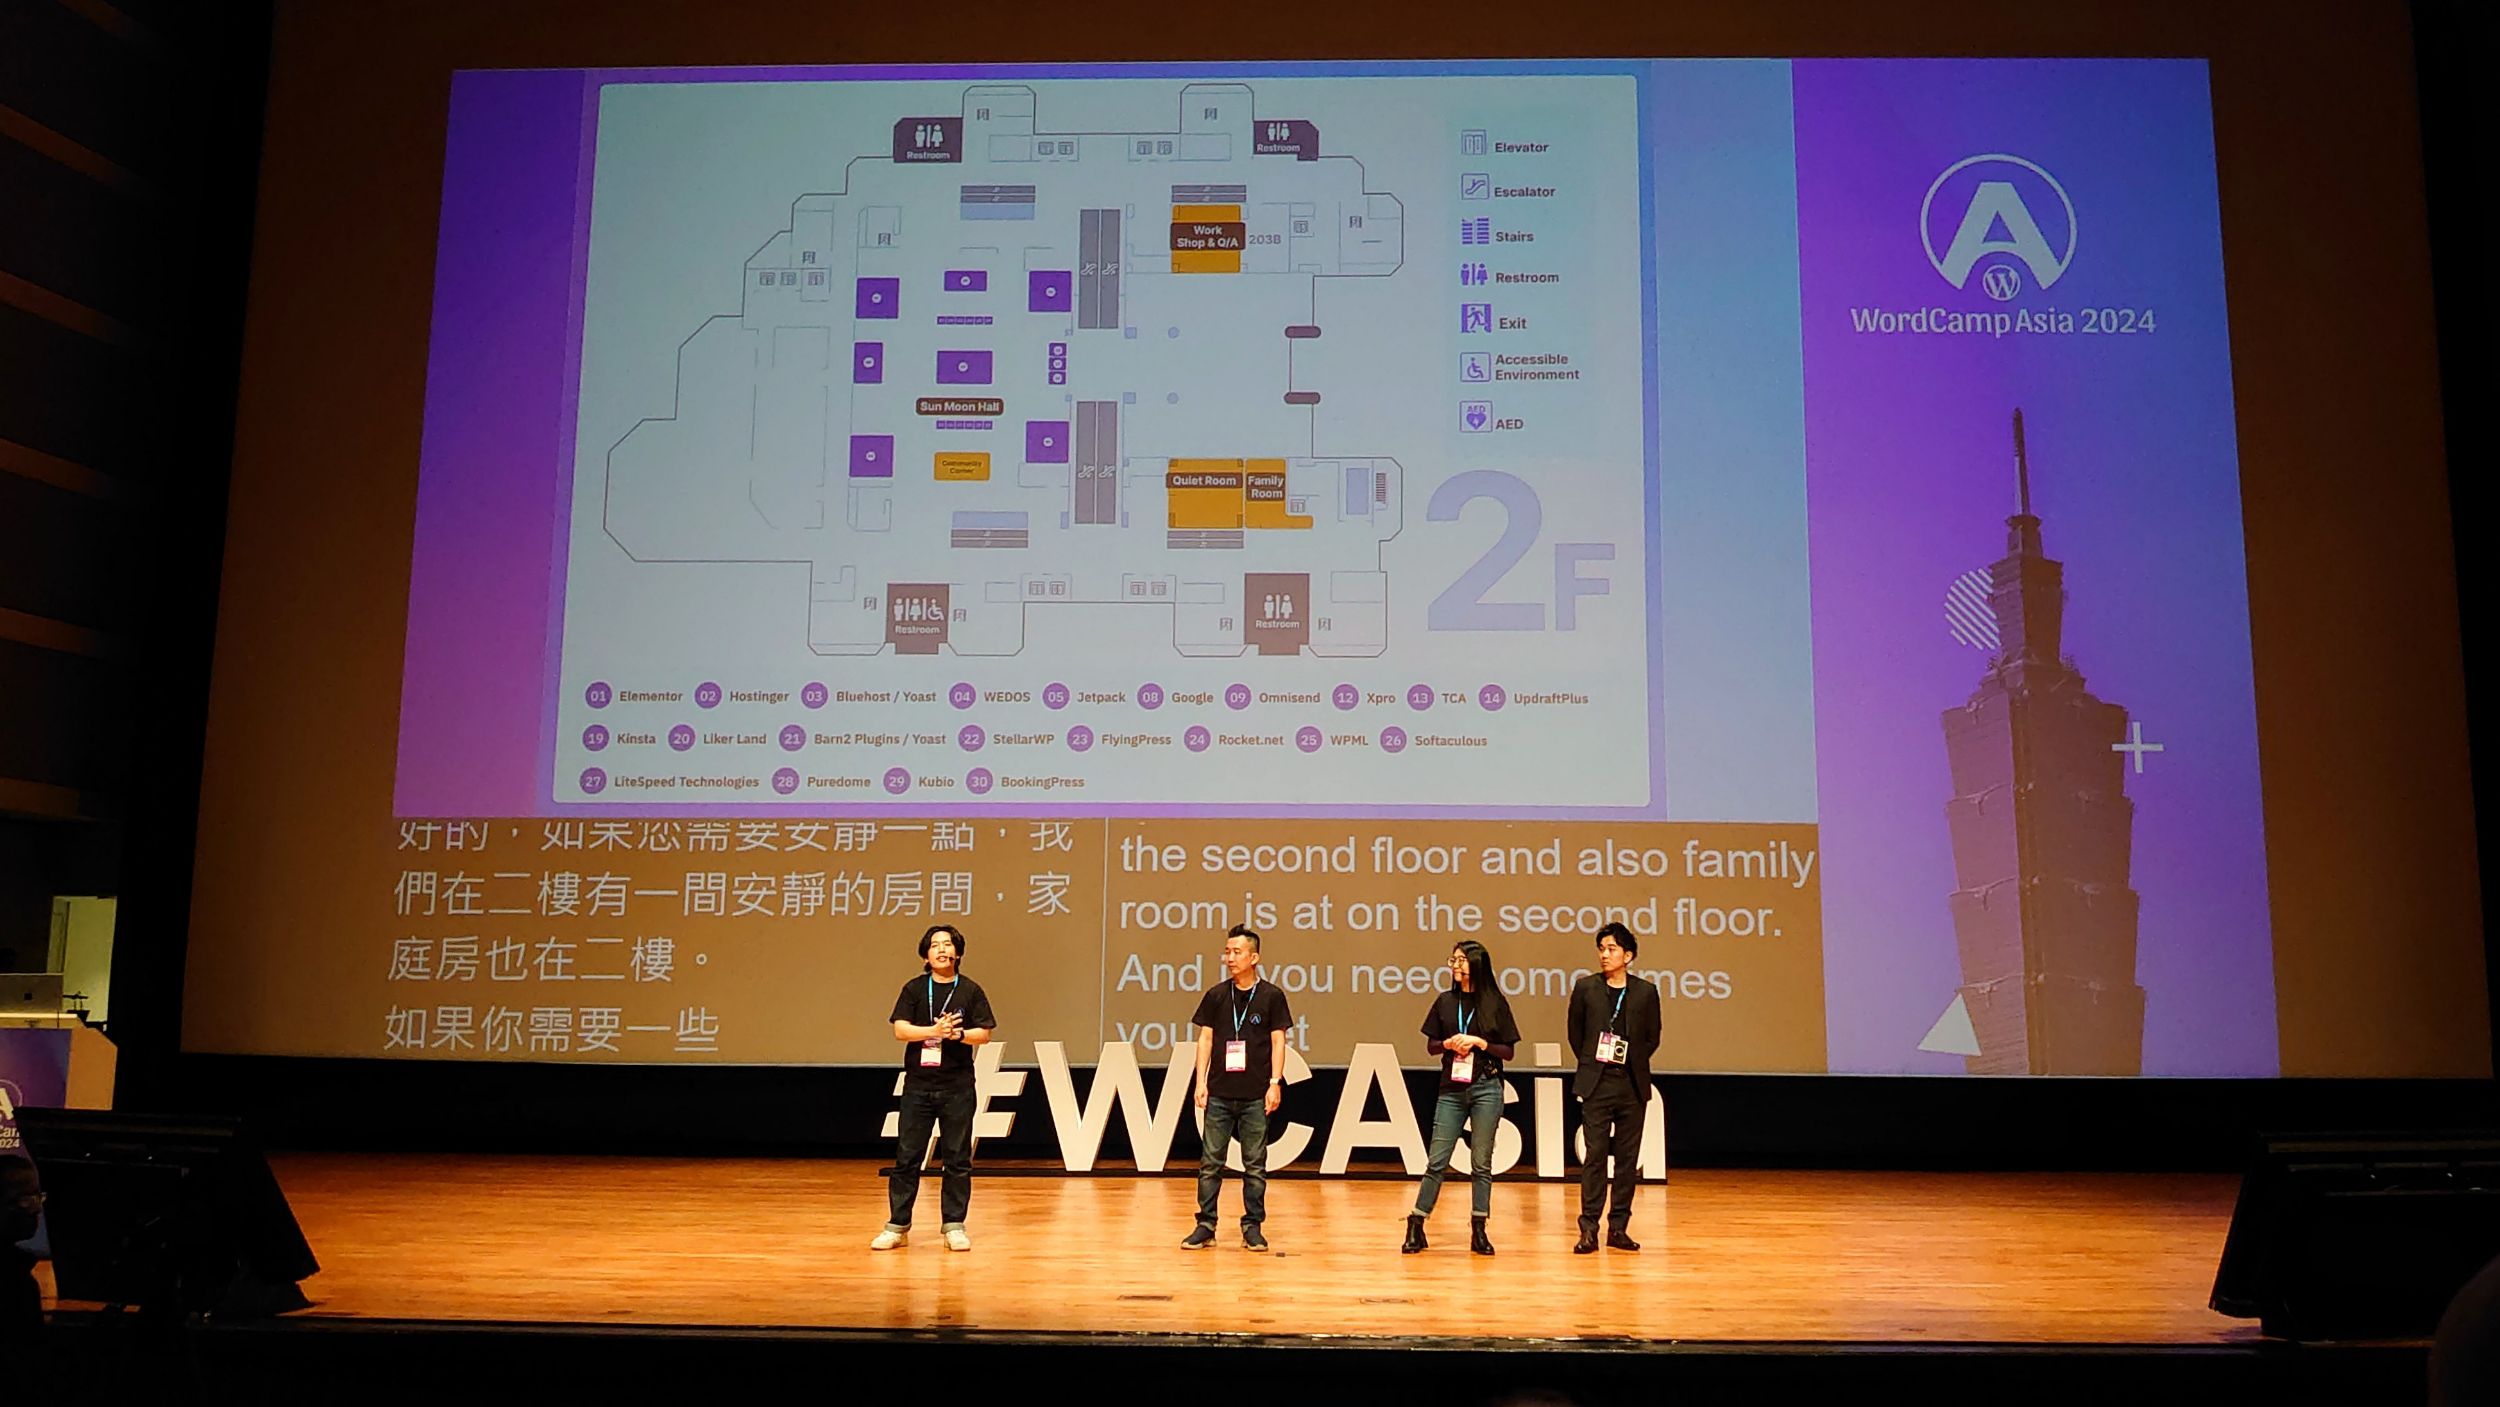 Day 2 on Mar 8 for WordCamp Asia 2024 - Opening Remarks. Sitting at the middle of the 5th row